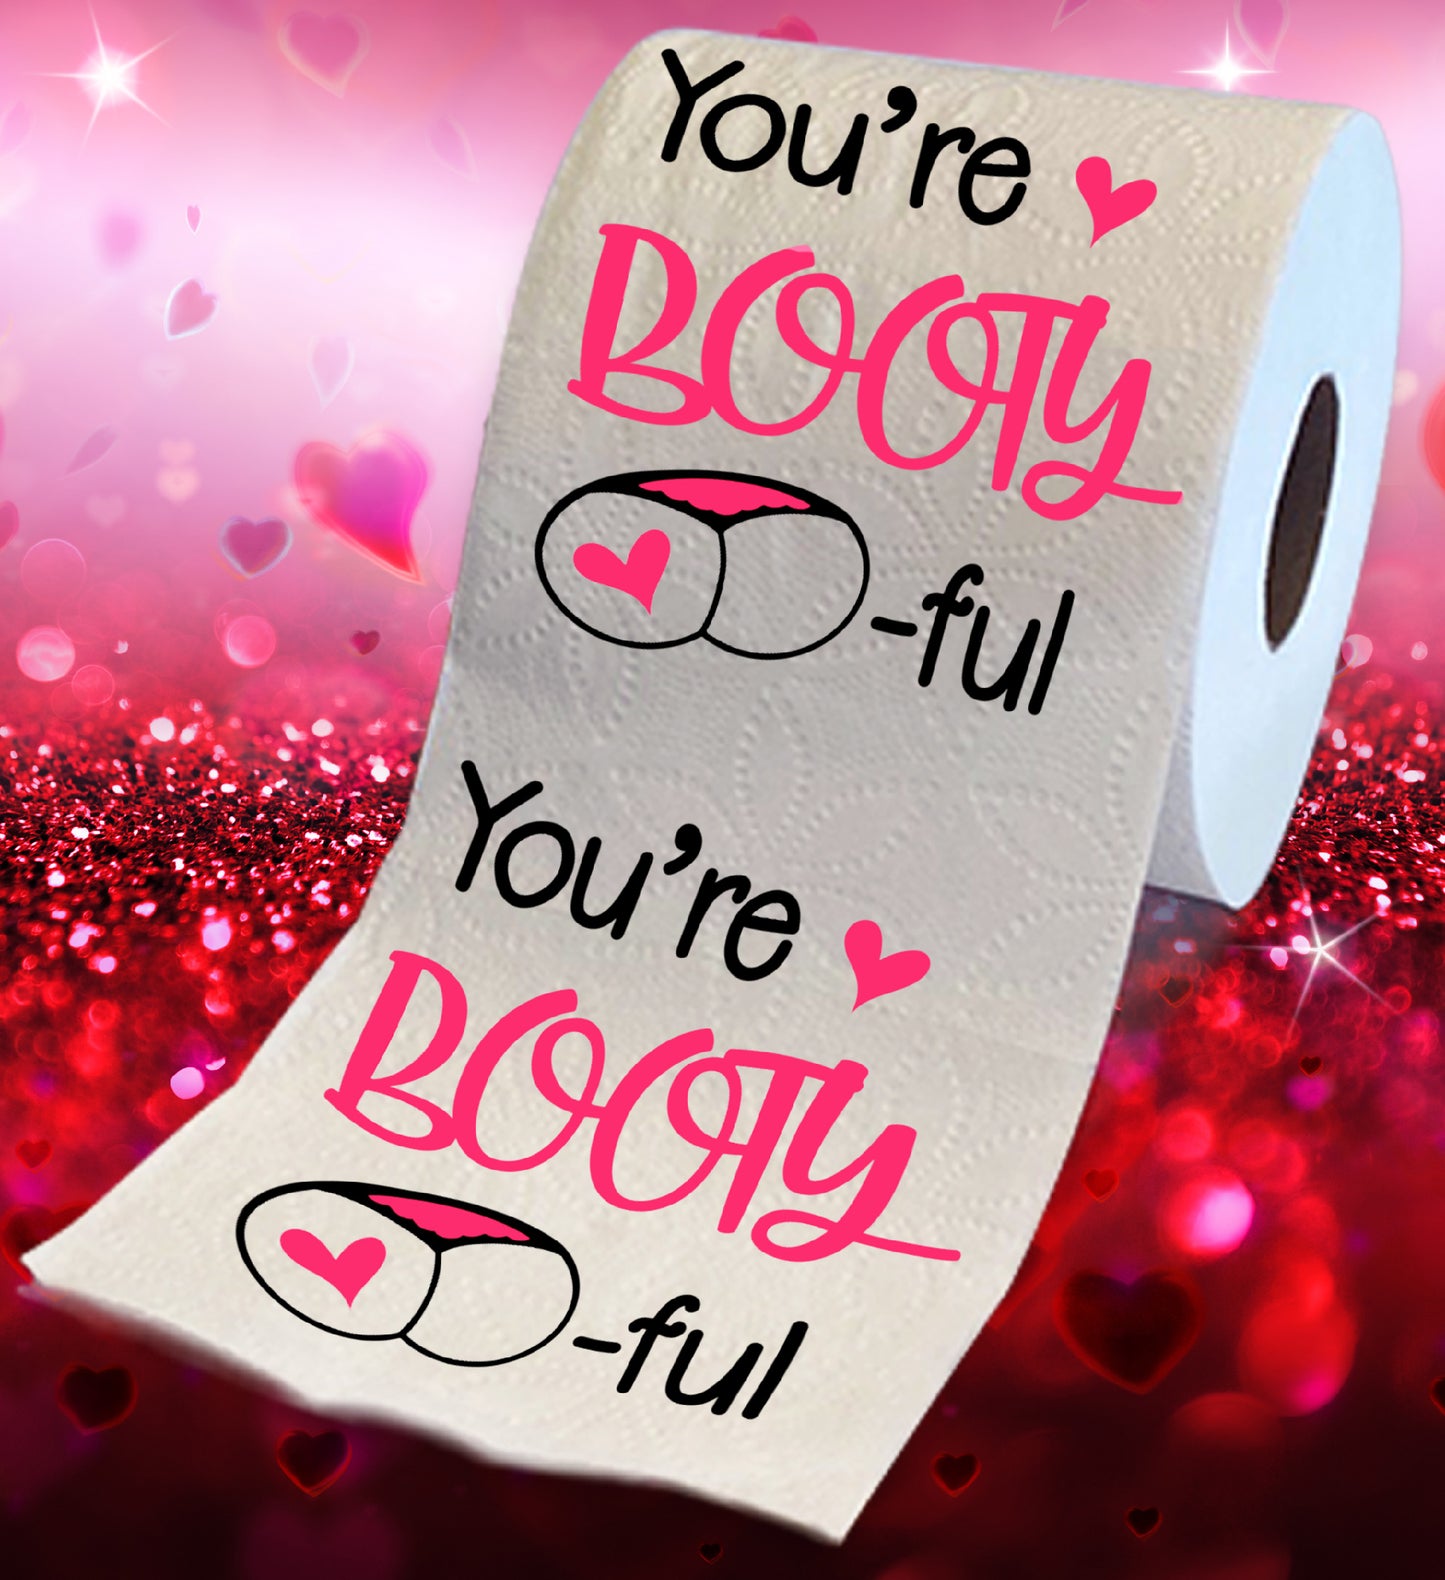 Printed TP You're Booty-ful Printed Toilet Paper Funny Gag Gift - 500 Sheets